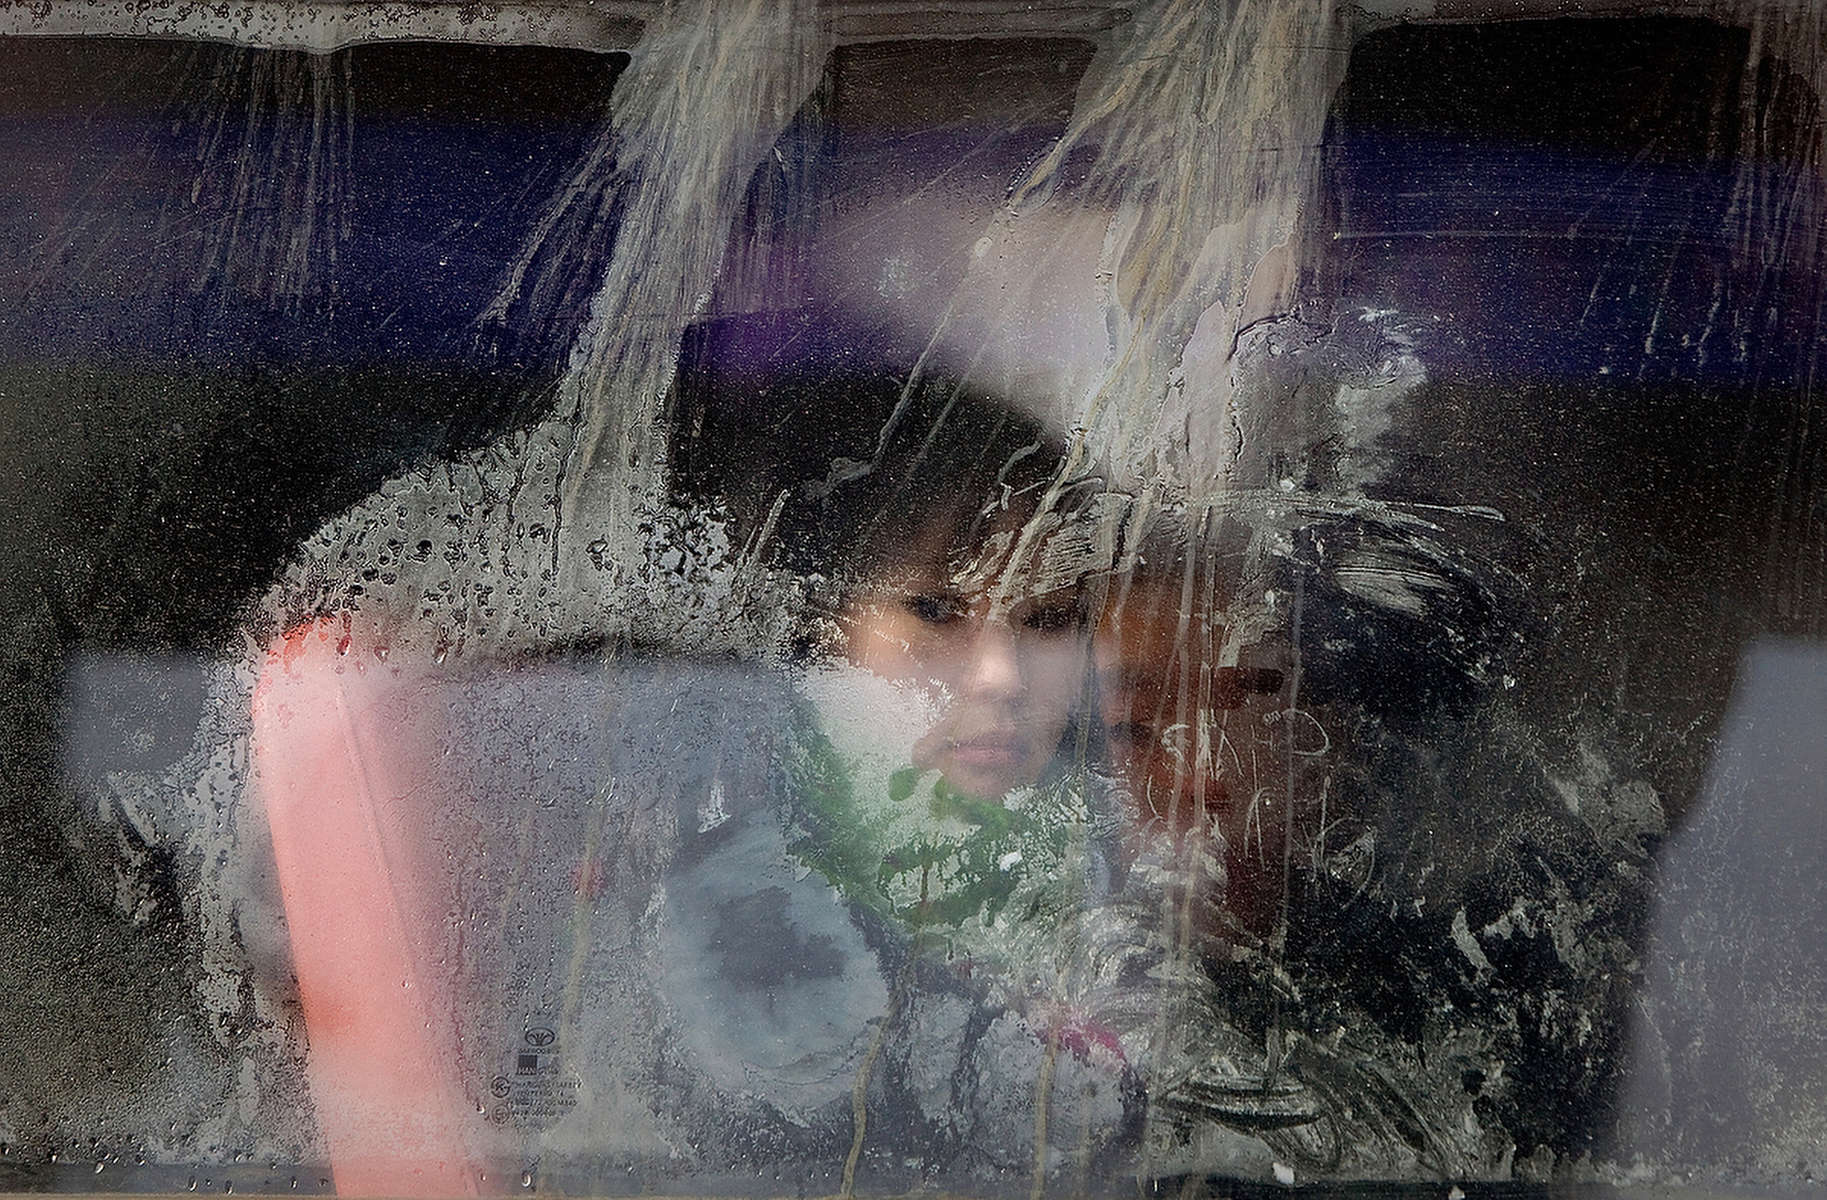 ULAAN BAATAR, MONGOLIA-MARCH 6 : A Mongolian boy looks out from a frosty window on a city bus March 6, 2010  in Ulaan Baatar, Mongolia.  Mongolia is still experiencing one of the worst Winters in 30 years. Presently the government has declared an emergency requiring foreign aid to alleviate the impact of the {quote} Zud{quote} ( Mongolian term for a multiple natural disaster) caused by bitter cold and thick snow. Recently, the UN allocated $3.7 million for humanitarian assistance to Mongolia from its Central Emergency Response Fund (CERF). Currently 1.5 m goats, 921,000 sheep, 169,000 cows and yaks, 89,000 horses and 1,500 camels had died according to the various UN agency reports. (Photo by Paula Bronstein /Getty Images)